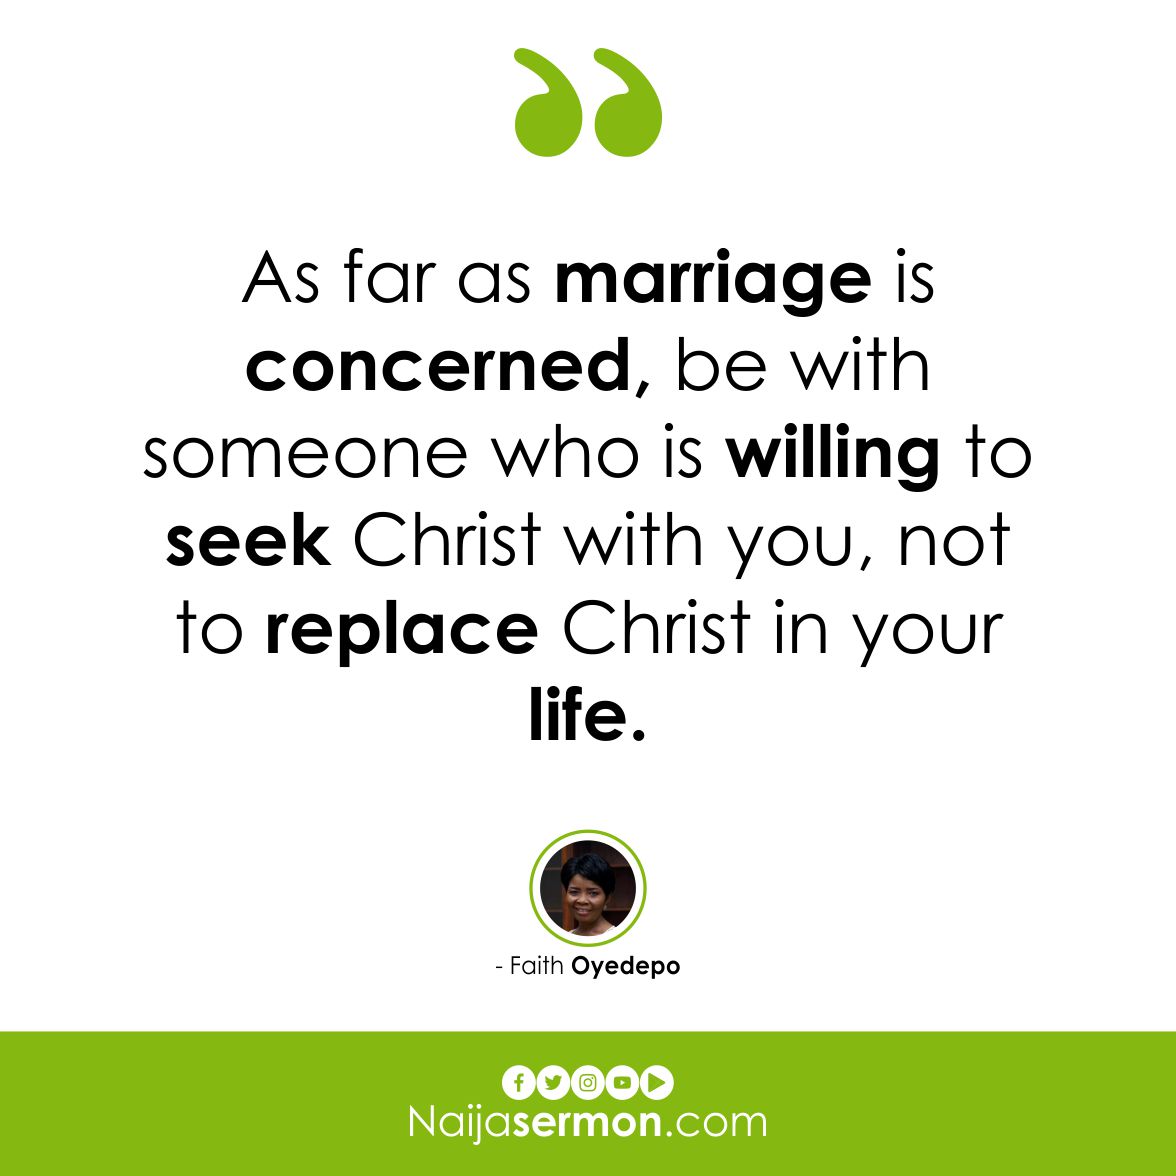 Quote of the Day by Faith Oyedepo 21